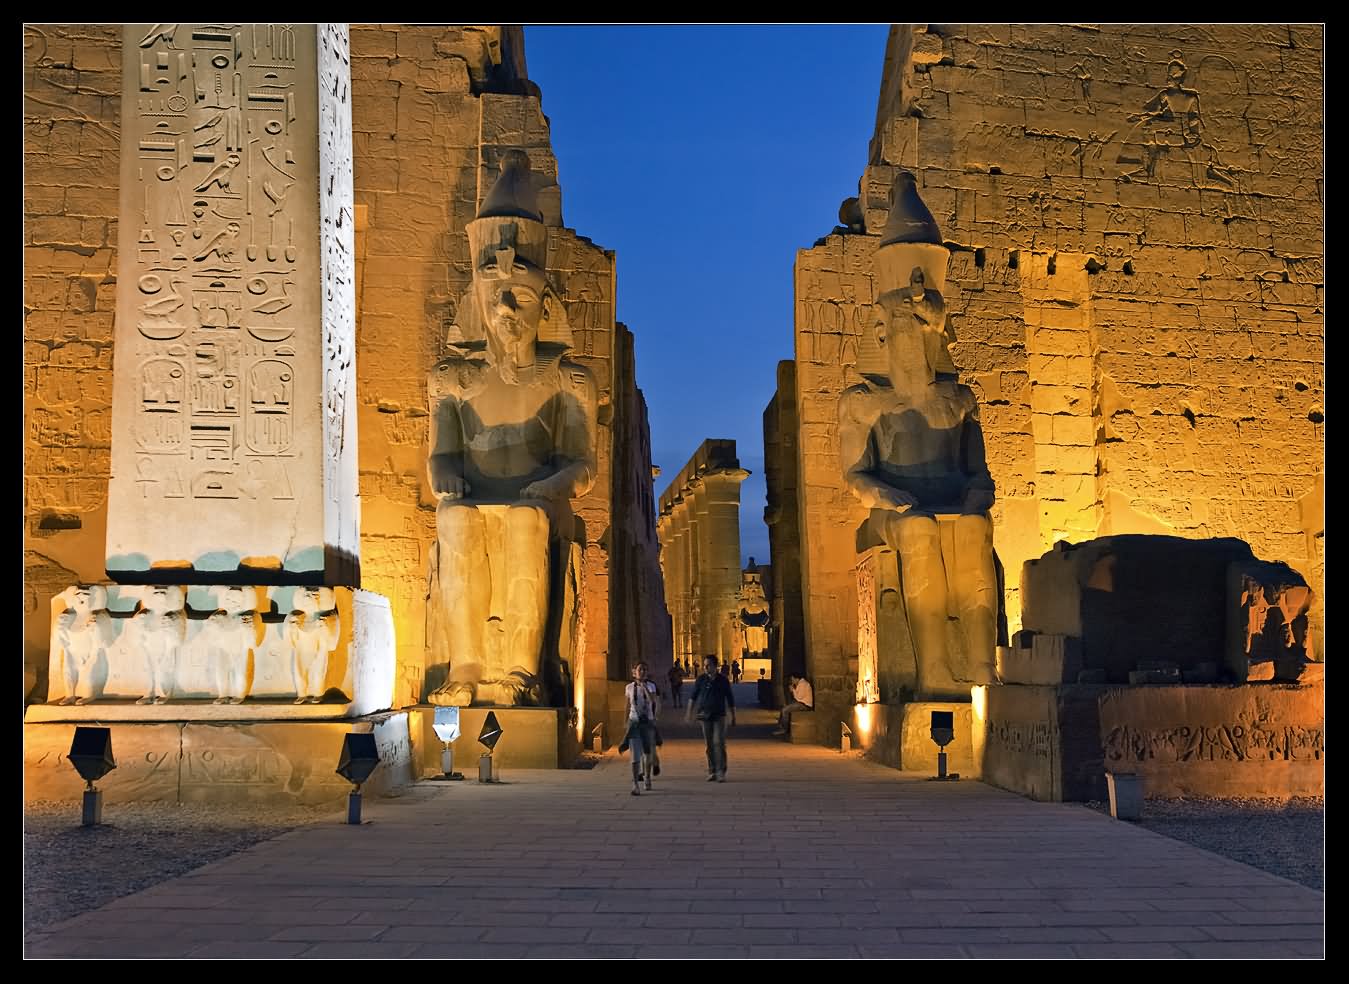 40 Most Incredible Night View Images And Pictures Of Luxor Temple, Egypt